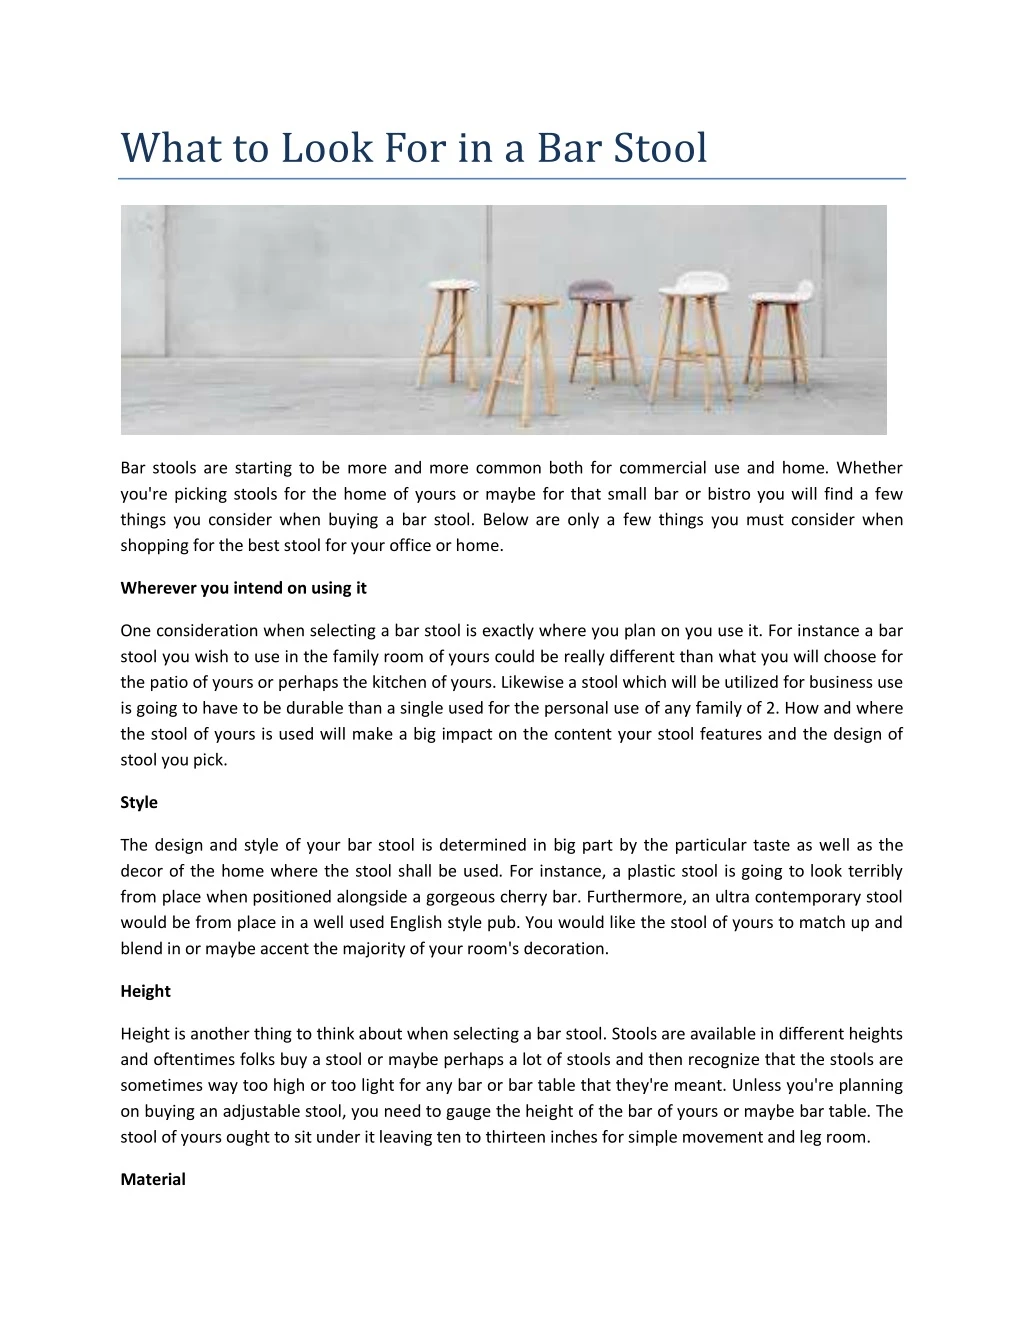 what to look for in a bar stool